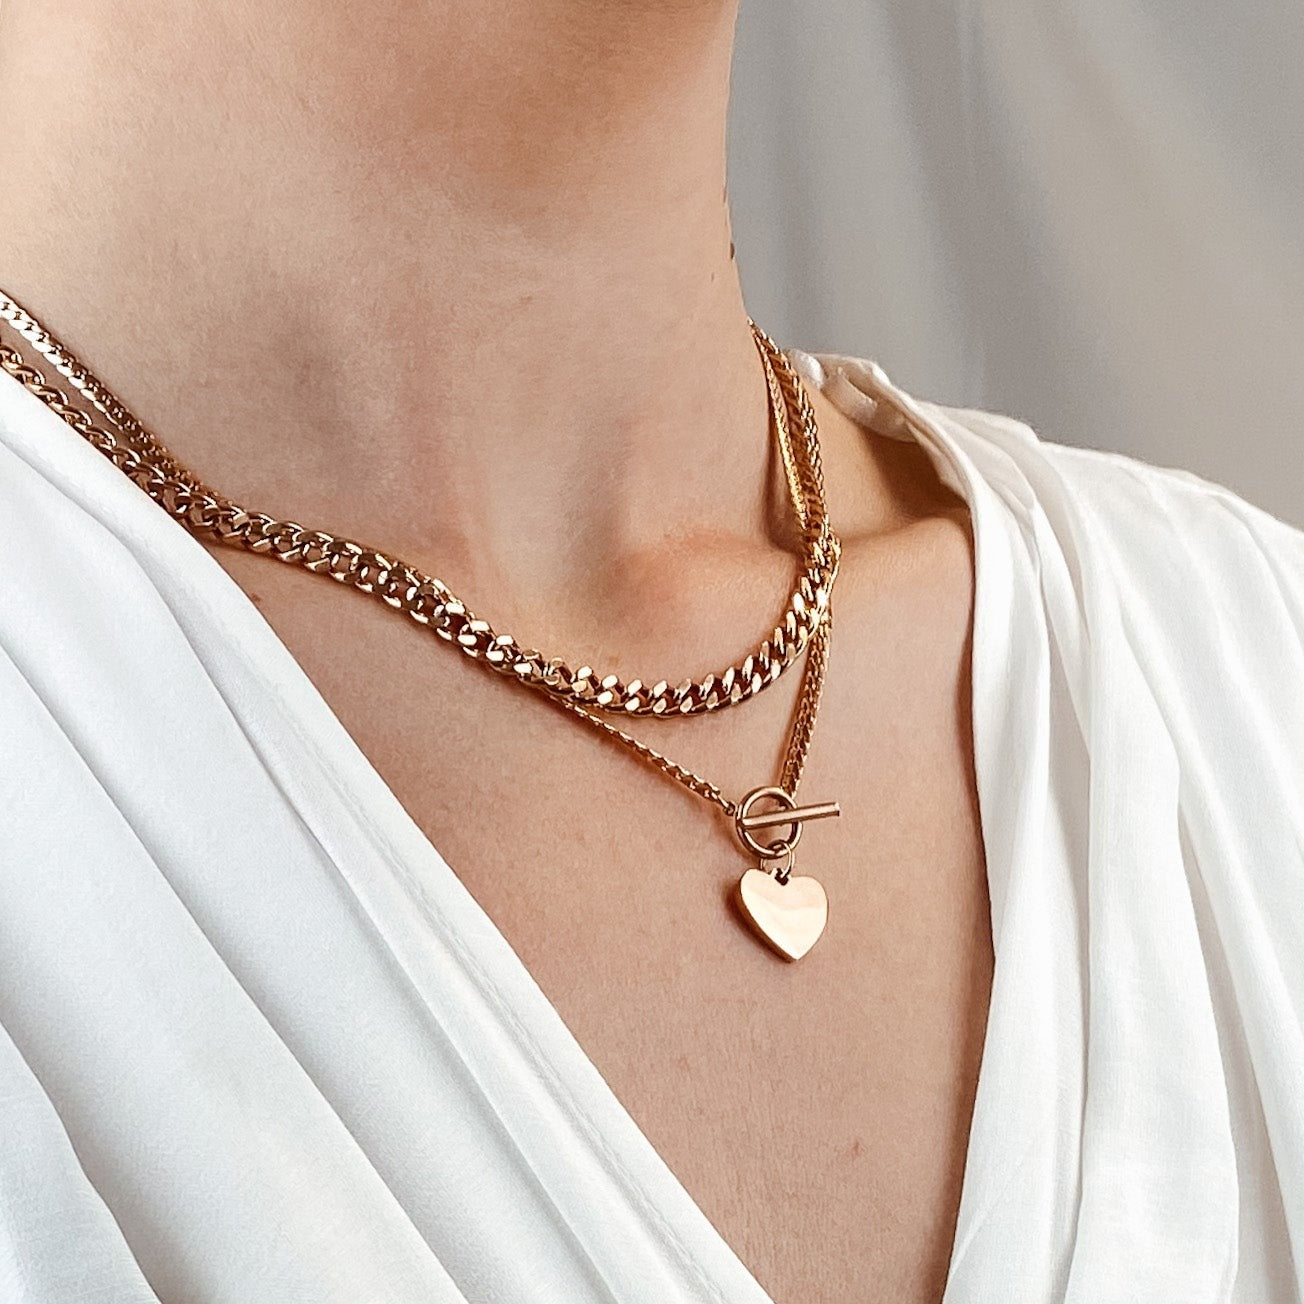 Heart Charm T-Bar Chain Necklace Rose Gold